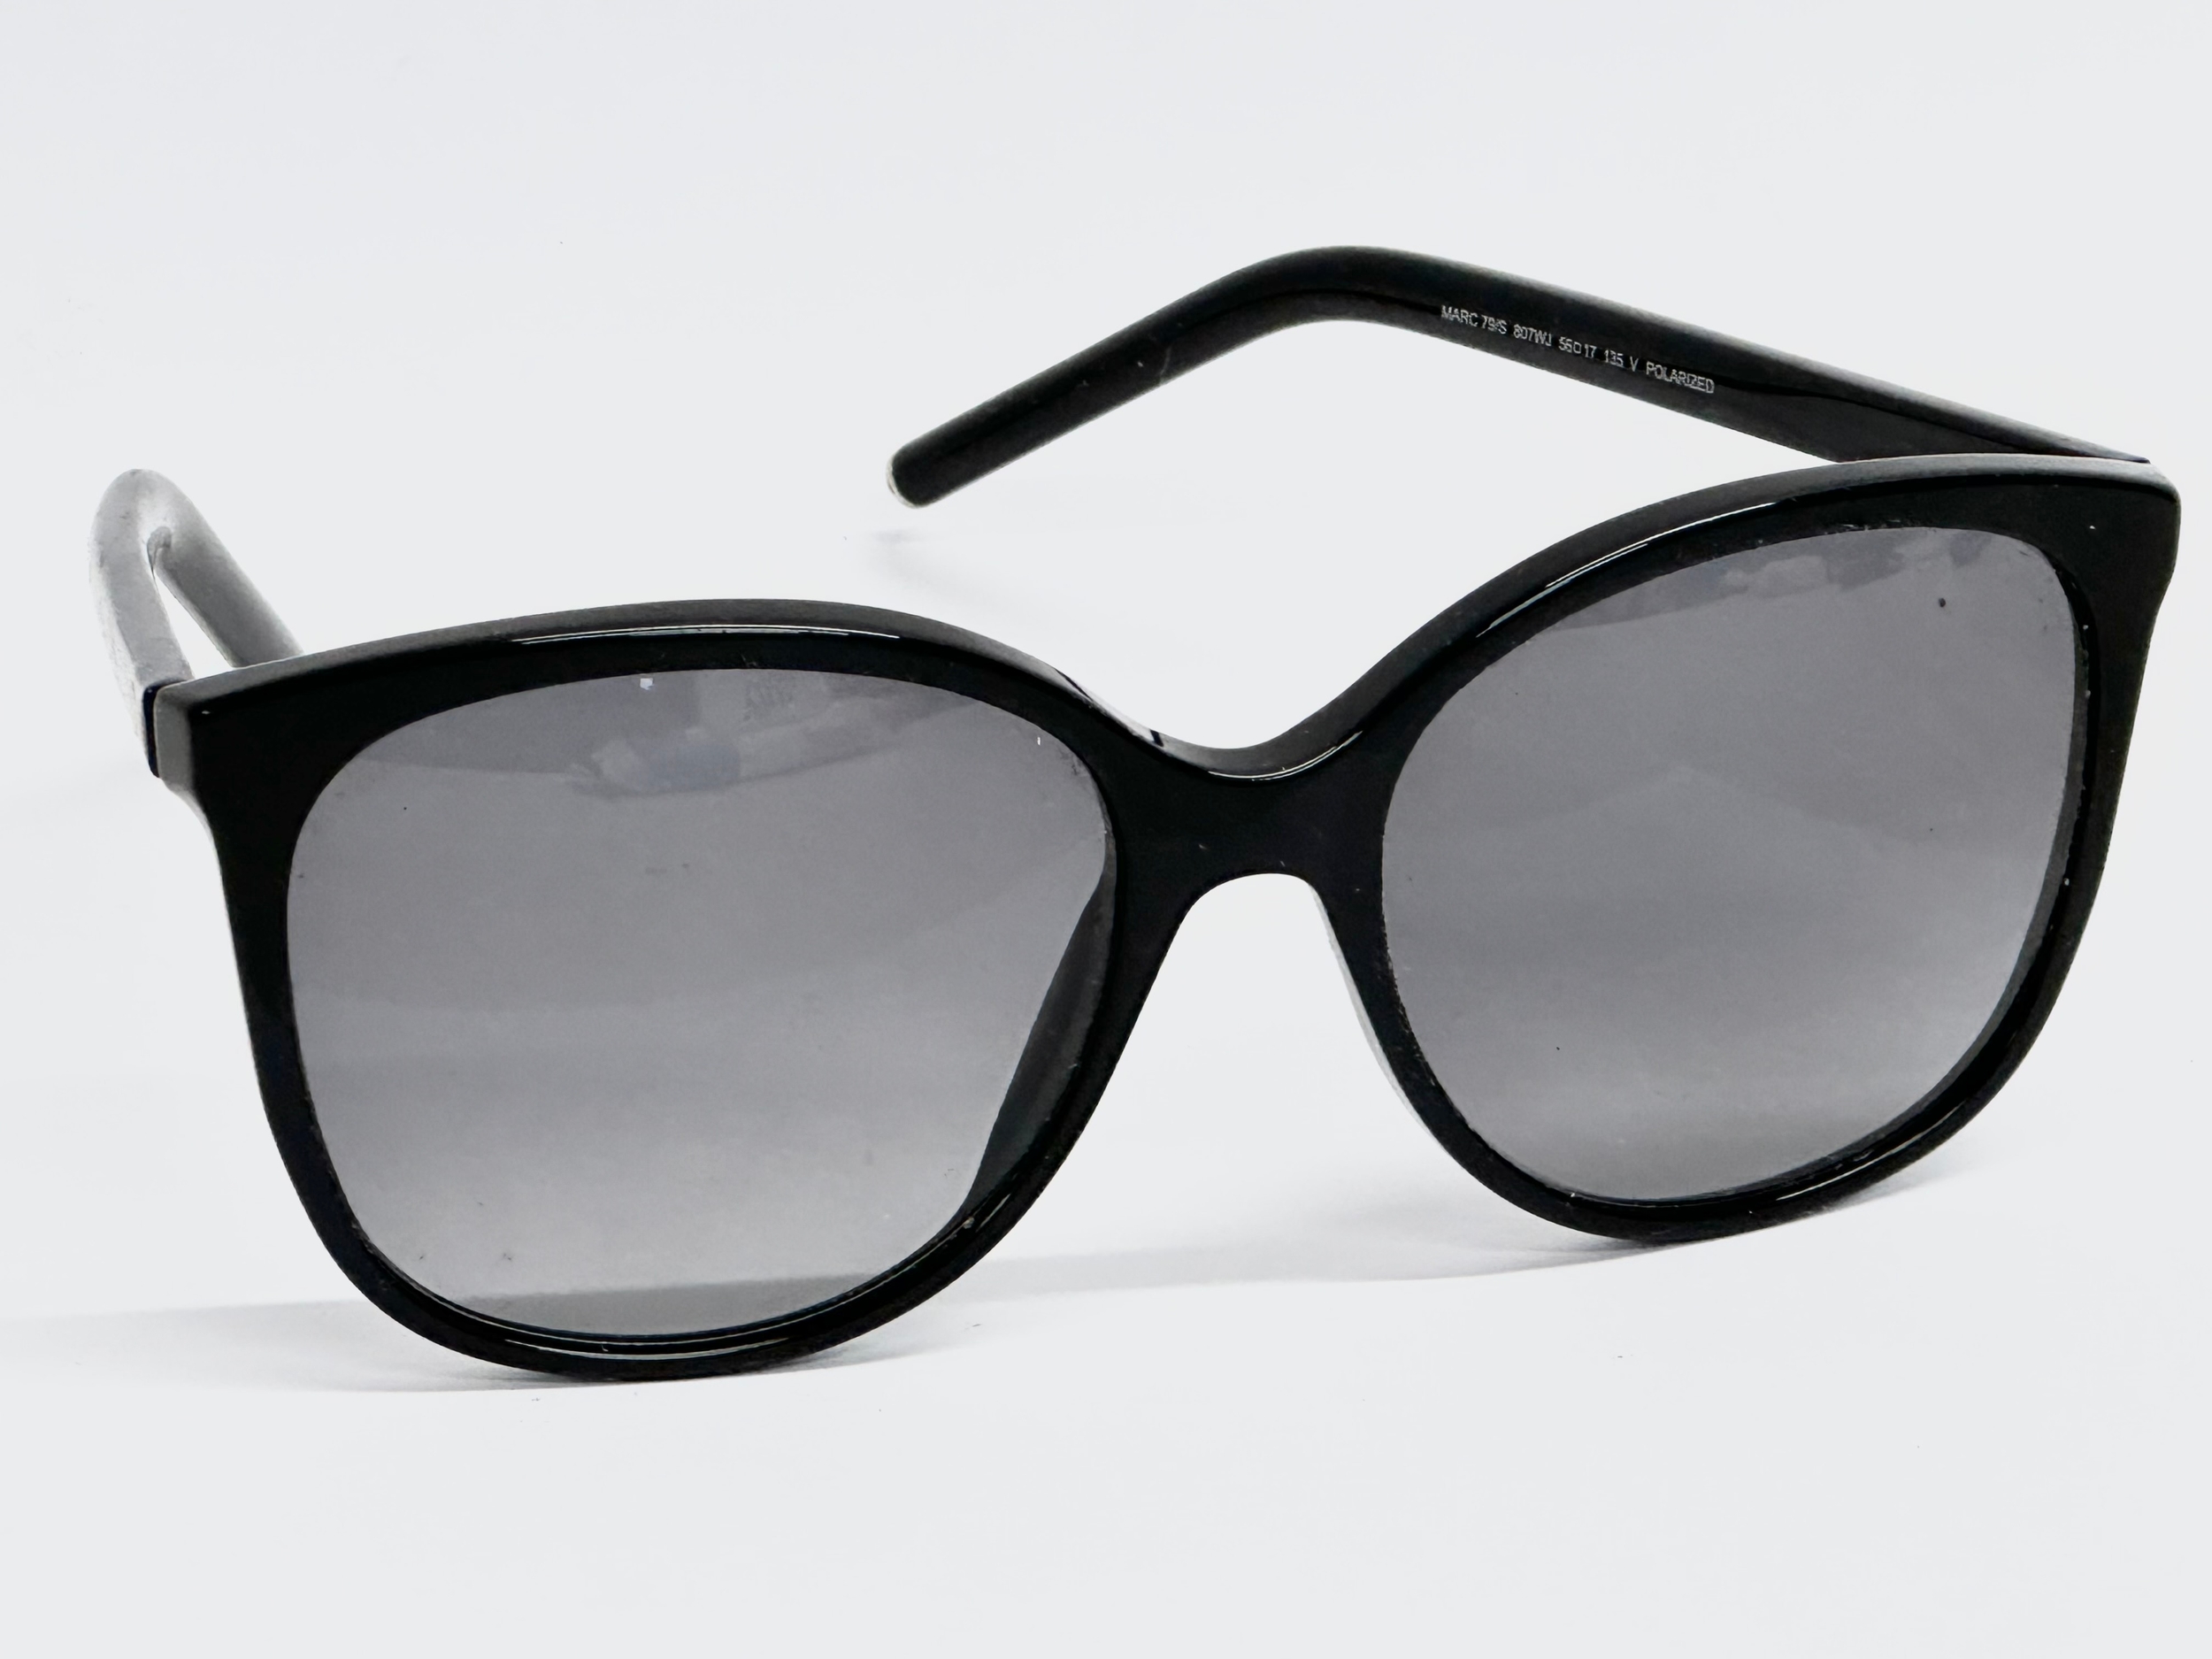 A pair of Marc Jacobs sunglasses.